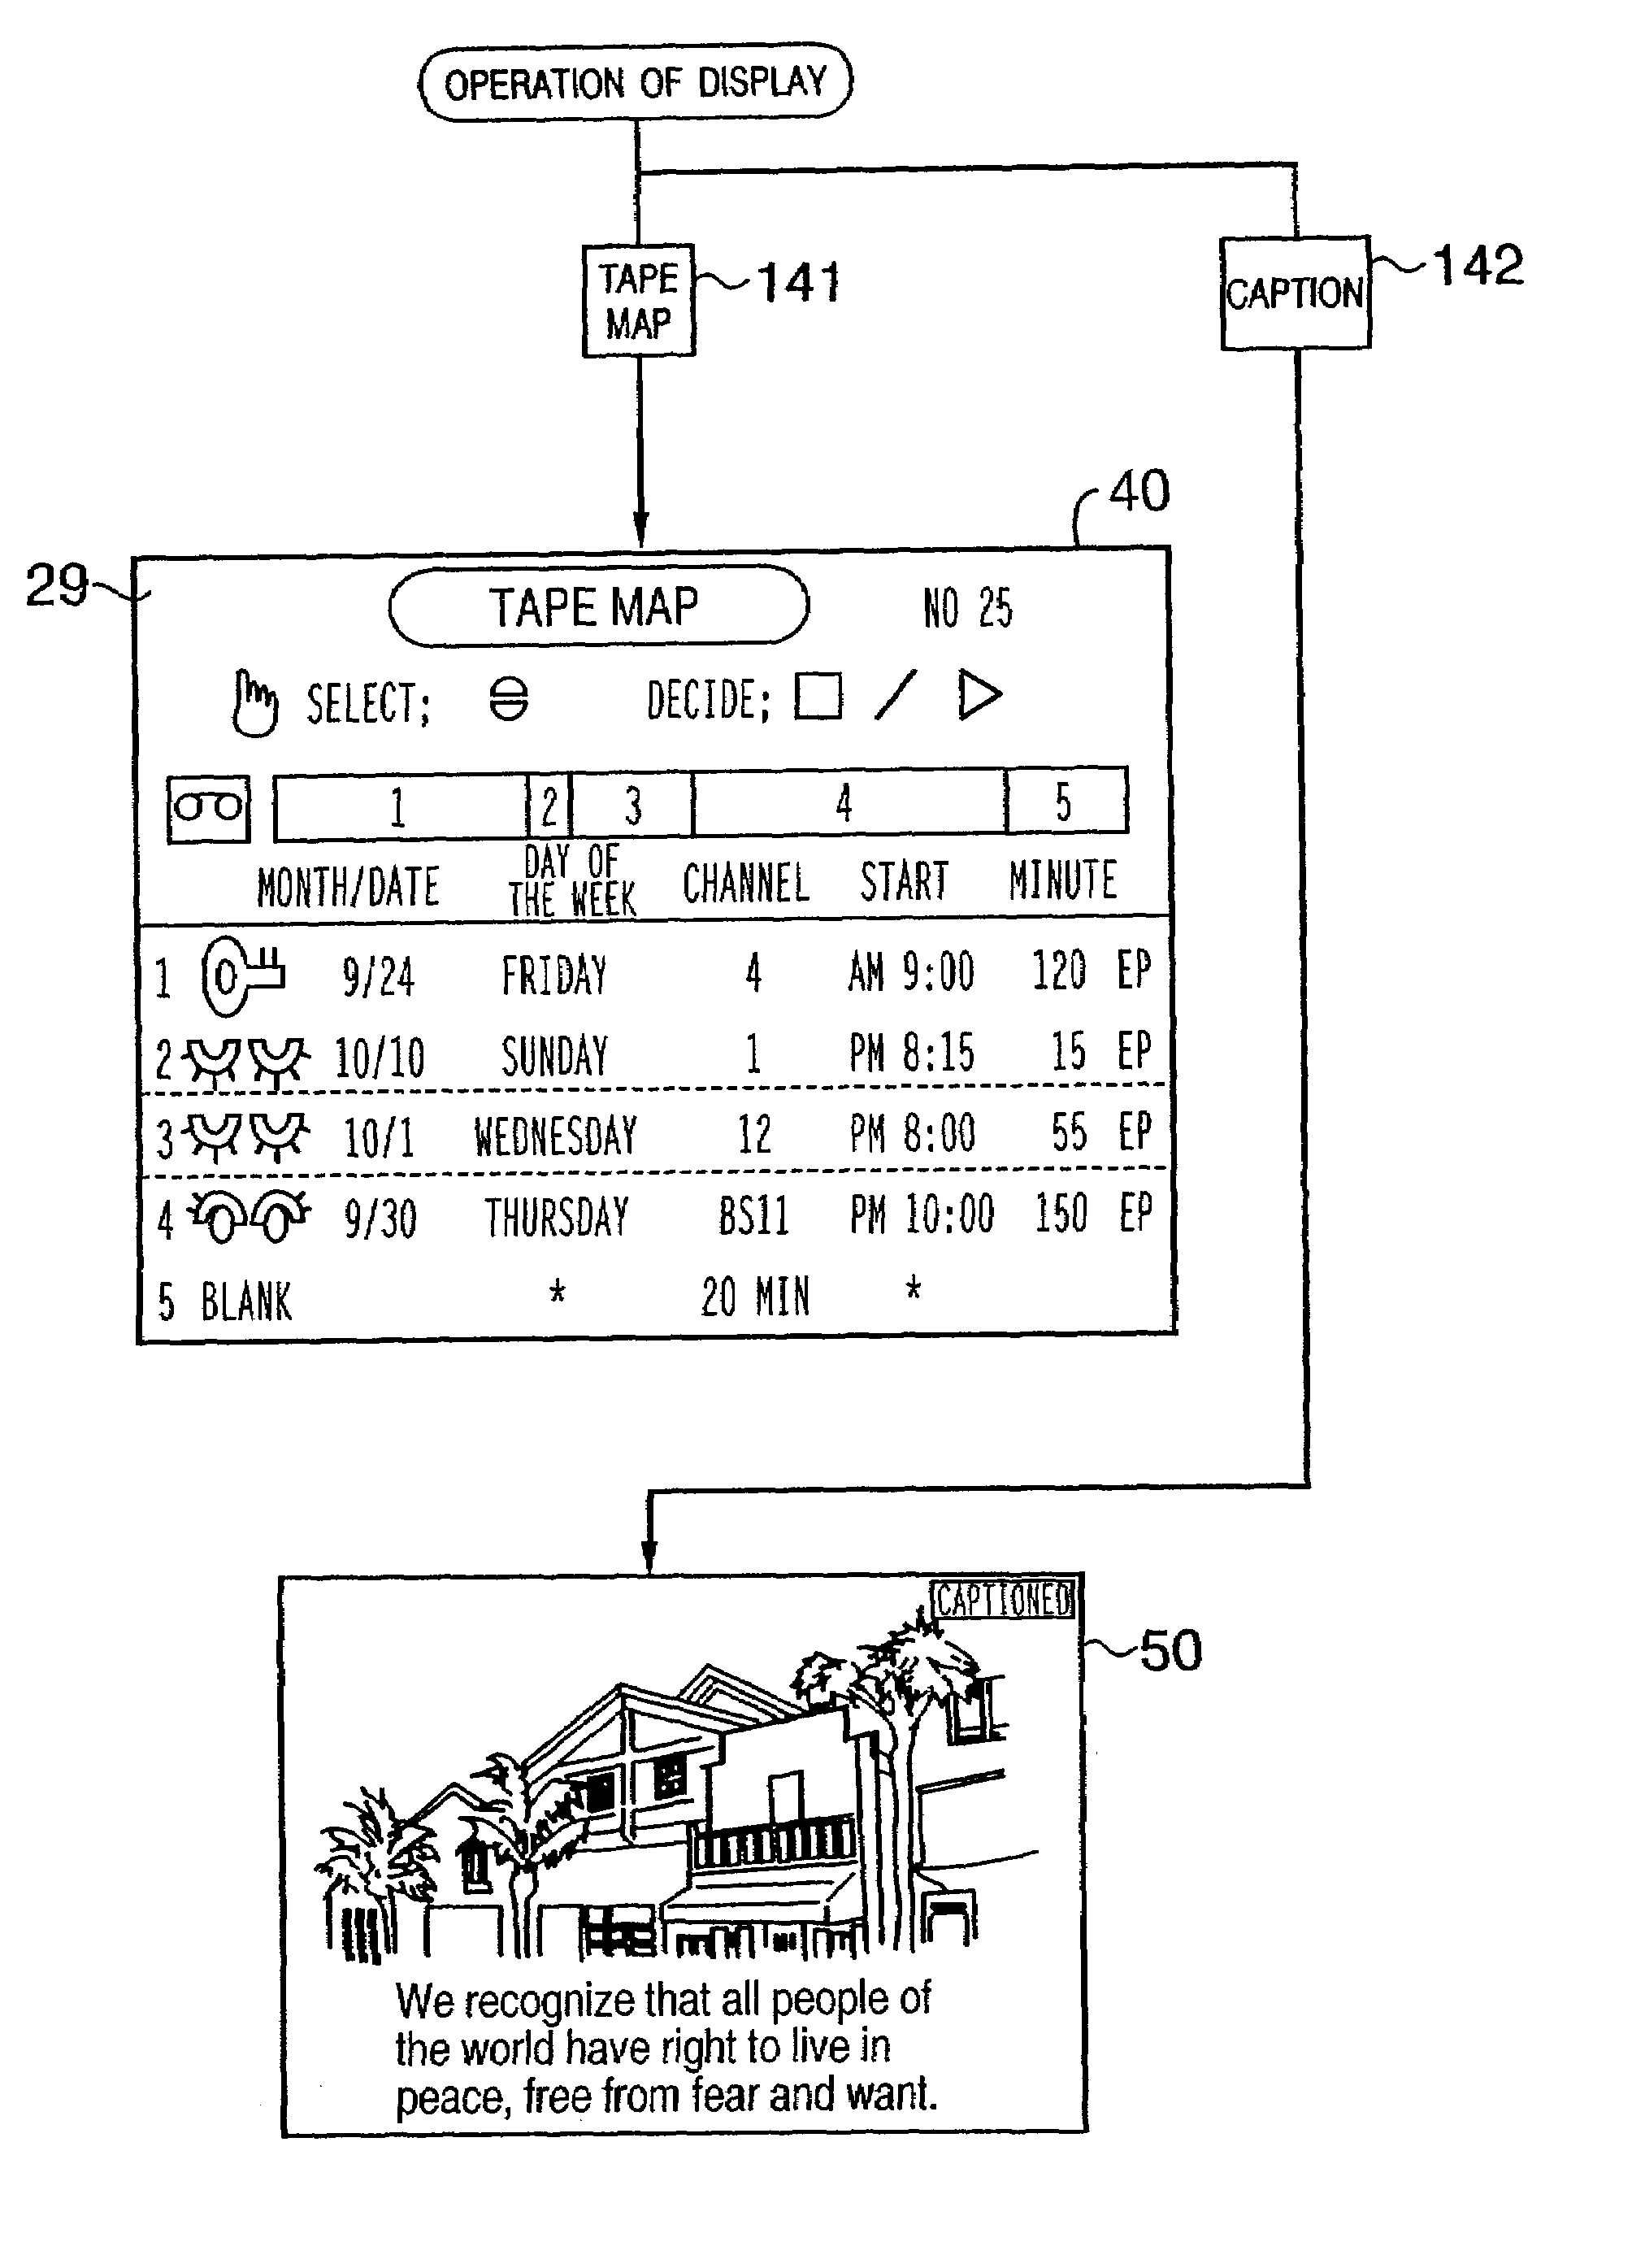 Magnetic recording/reproducing apparatus for searching programs recorded on magnetic tape